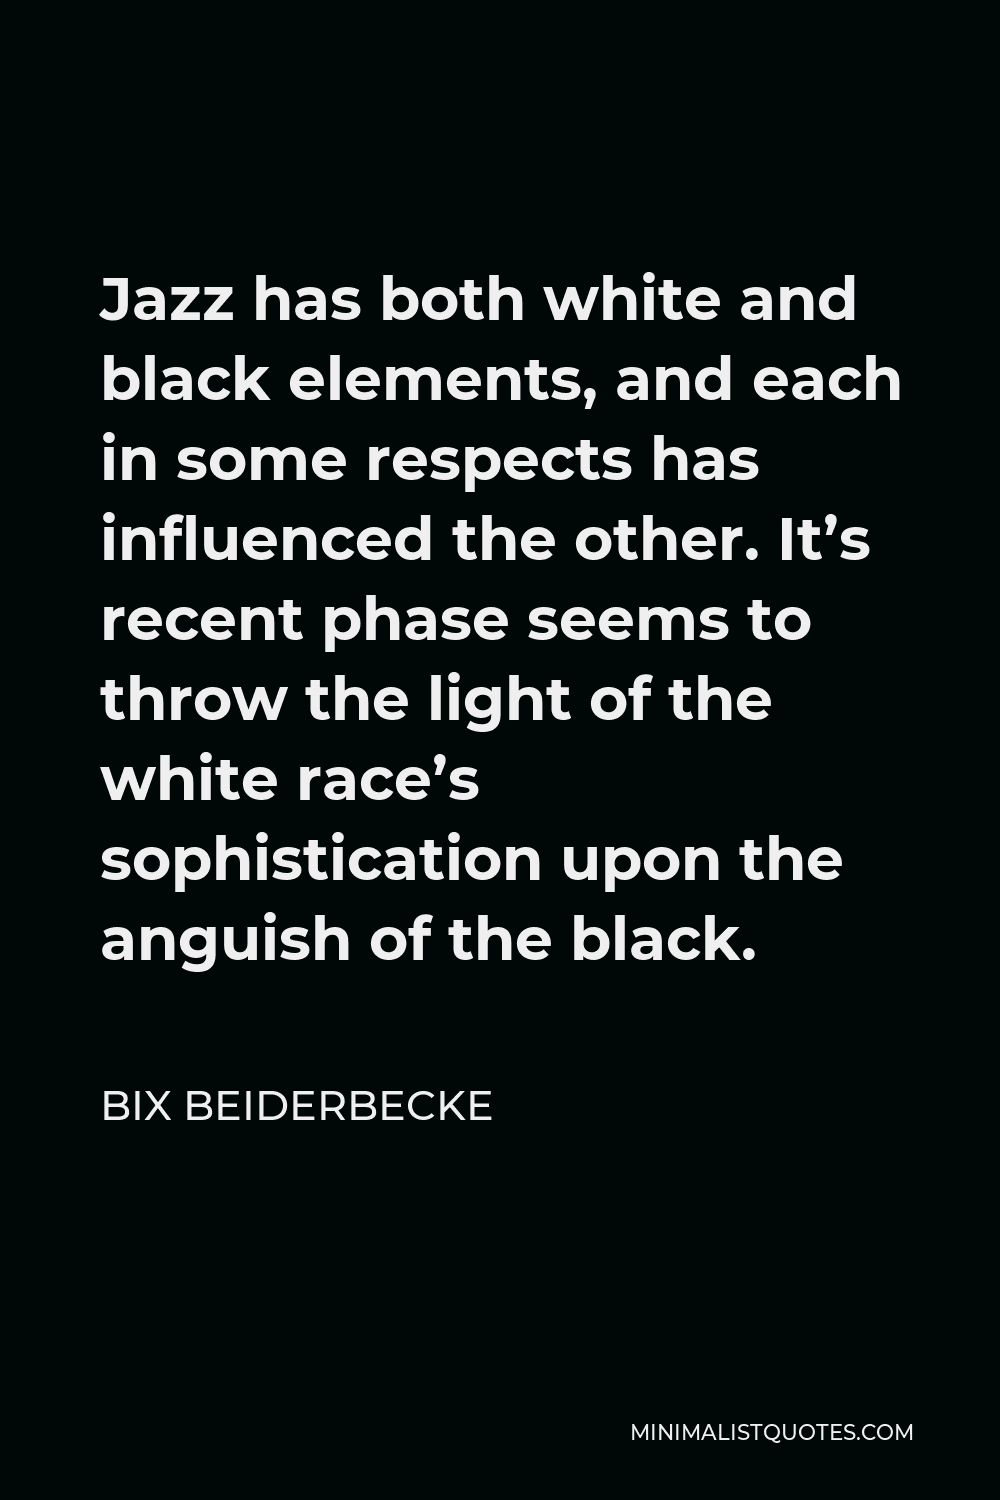 Bix Beiderbecke Quote - Jazz has both white and black elements, and each in some respects has influenced the other. It’s recent phase seems to throw the light of the white race’s sophistication upon the anguish of the black.